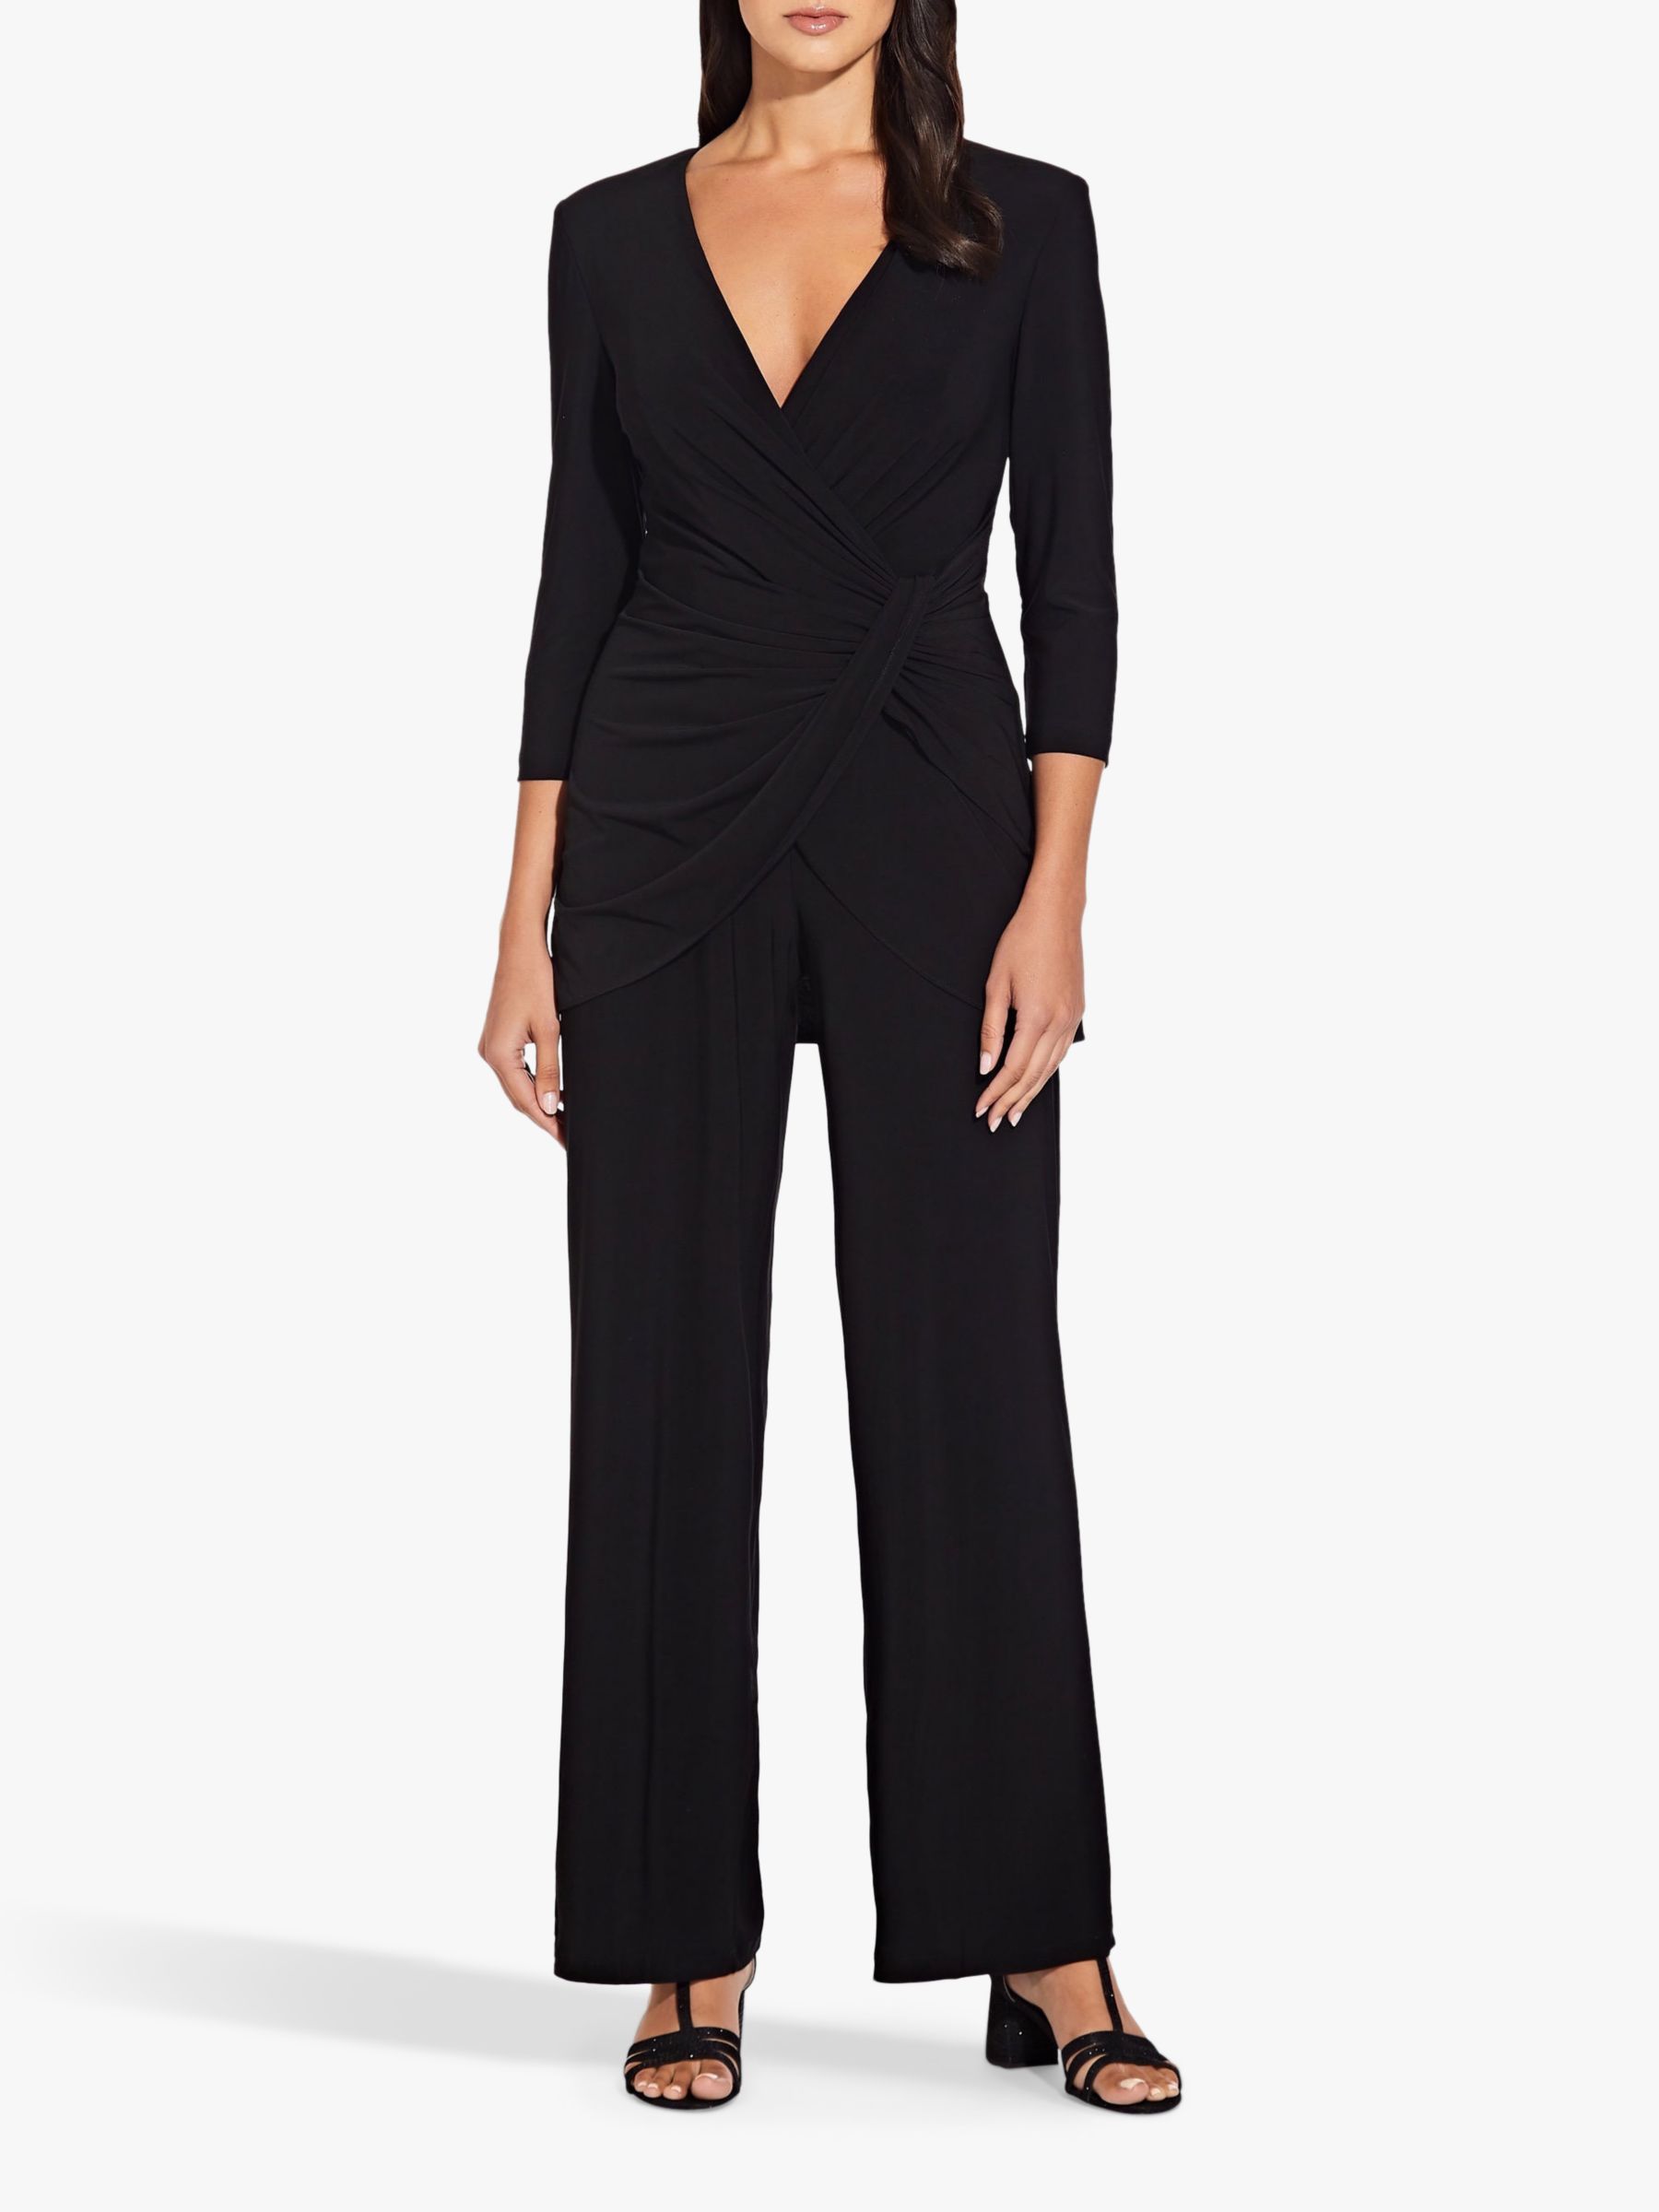 Adrianna Papell Jersey Long Sleeve Jumpsuit, Black at John Lewis & Partners